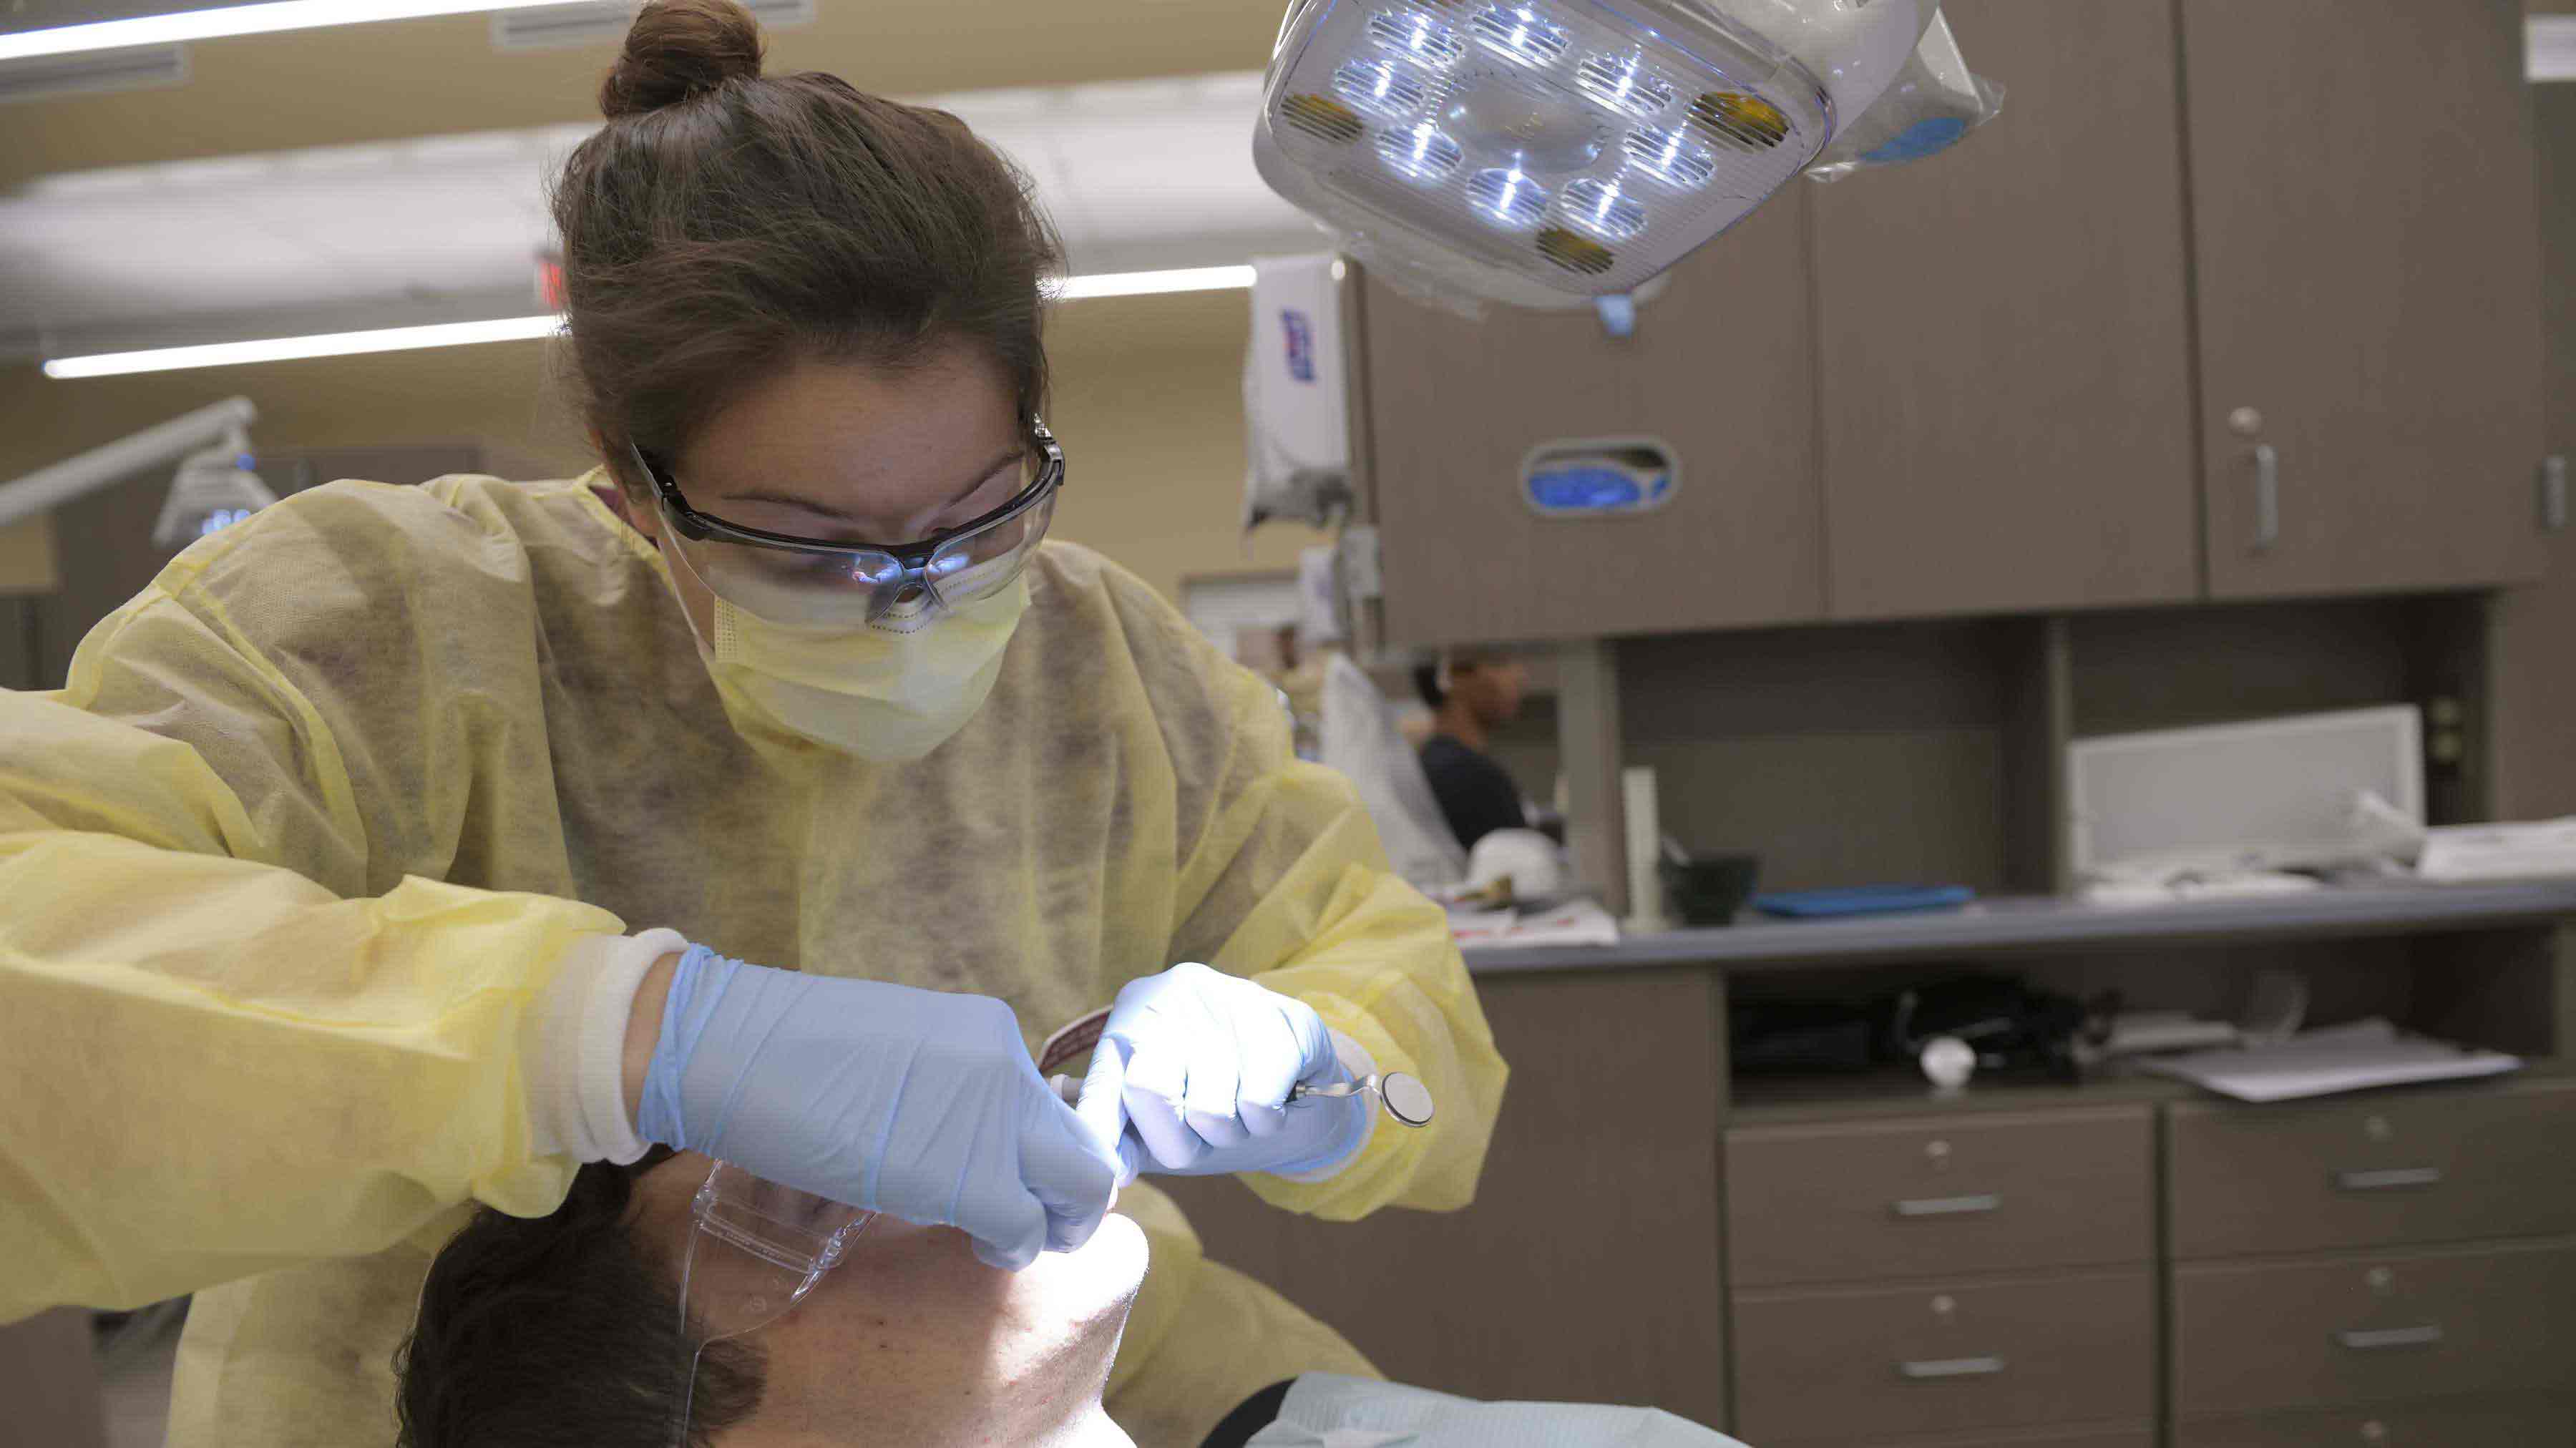 Montco's Dental Hygiene Clinic is open to the public by appointment. Photo by David DeBalko